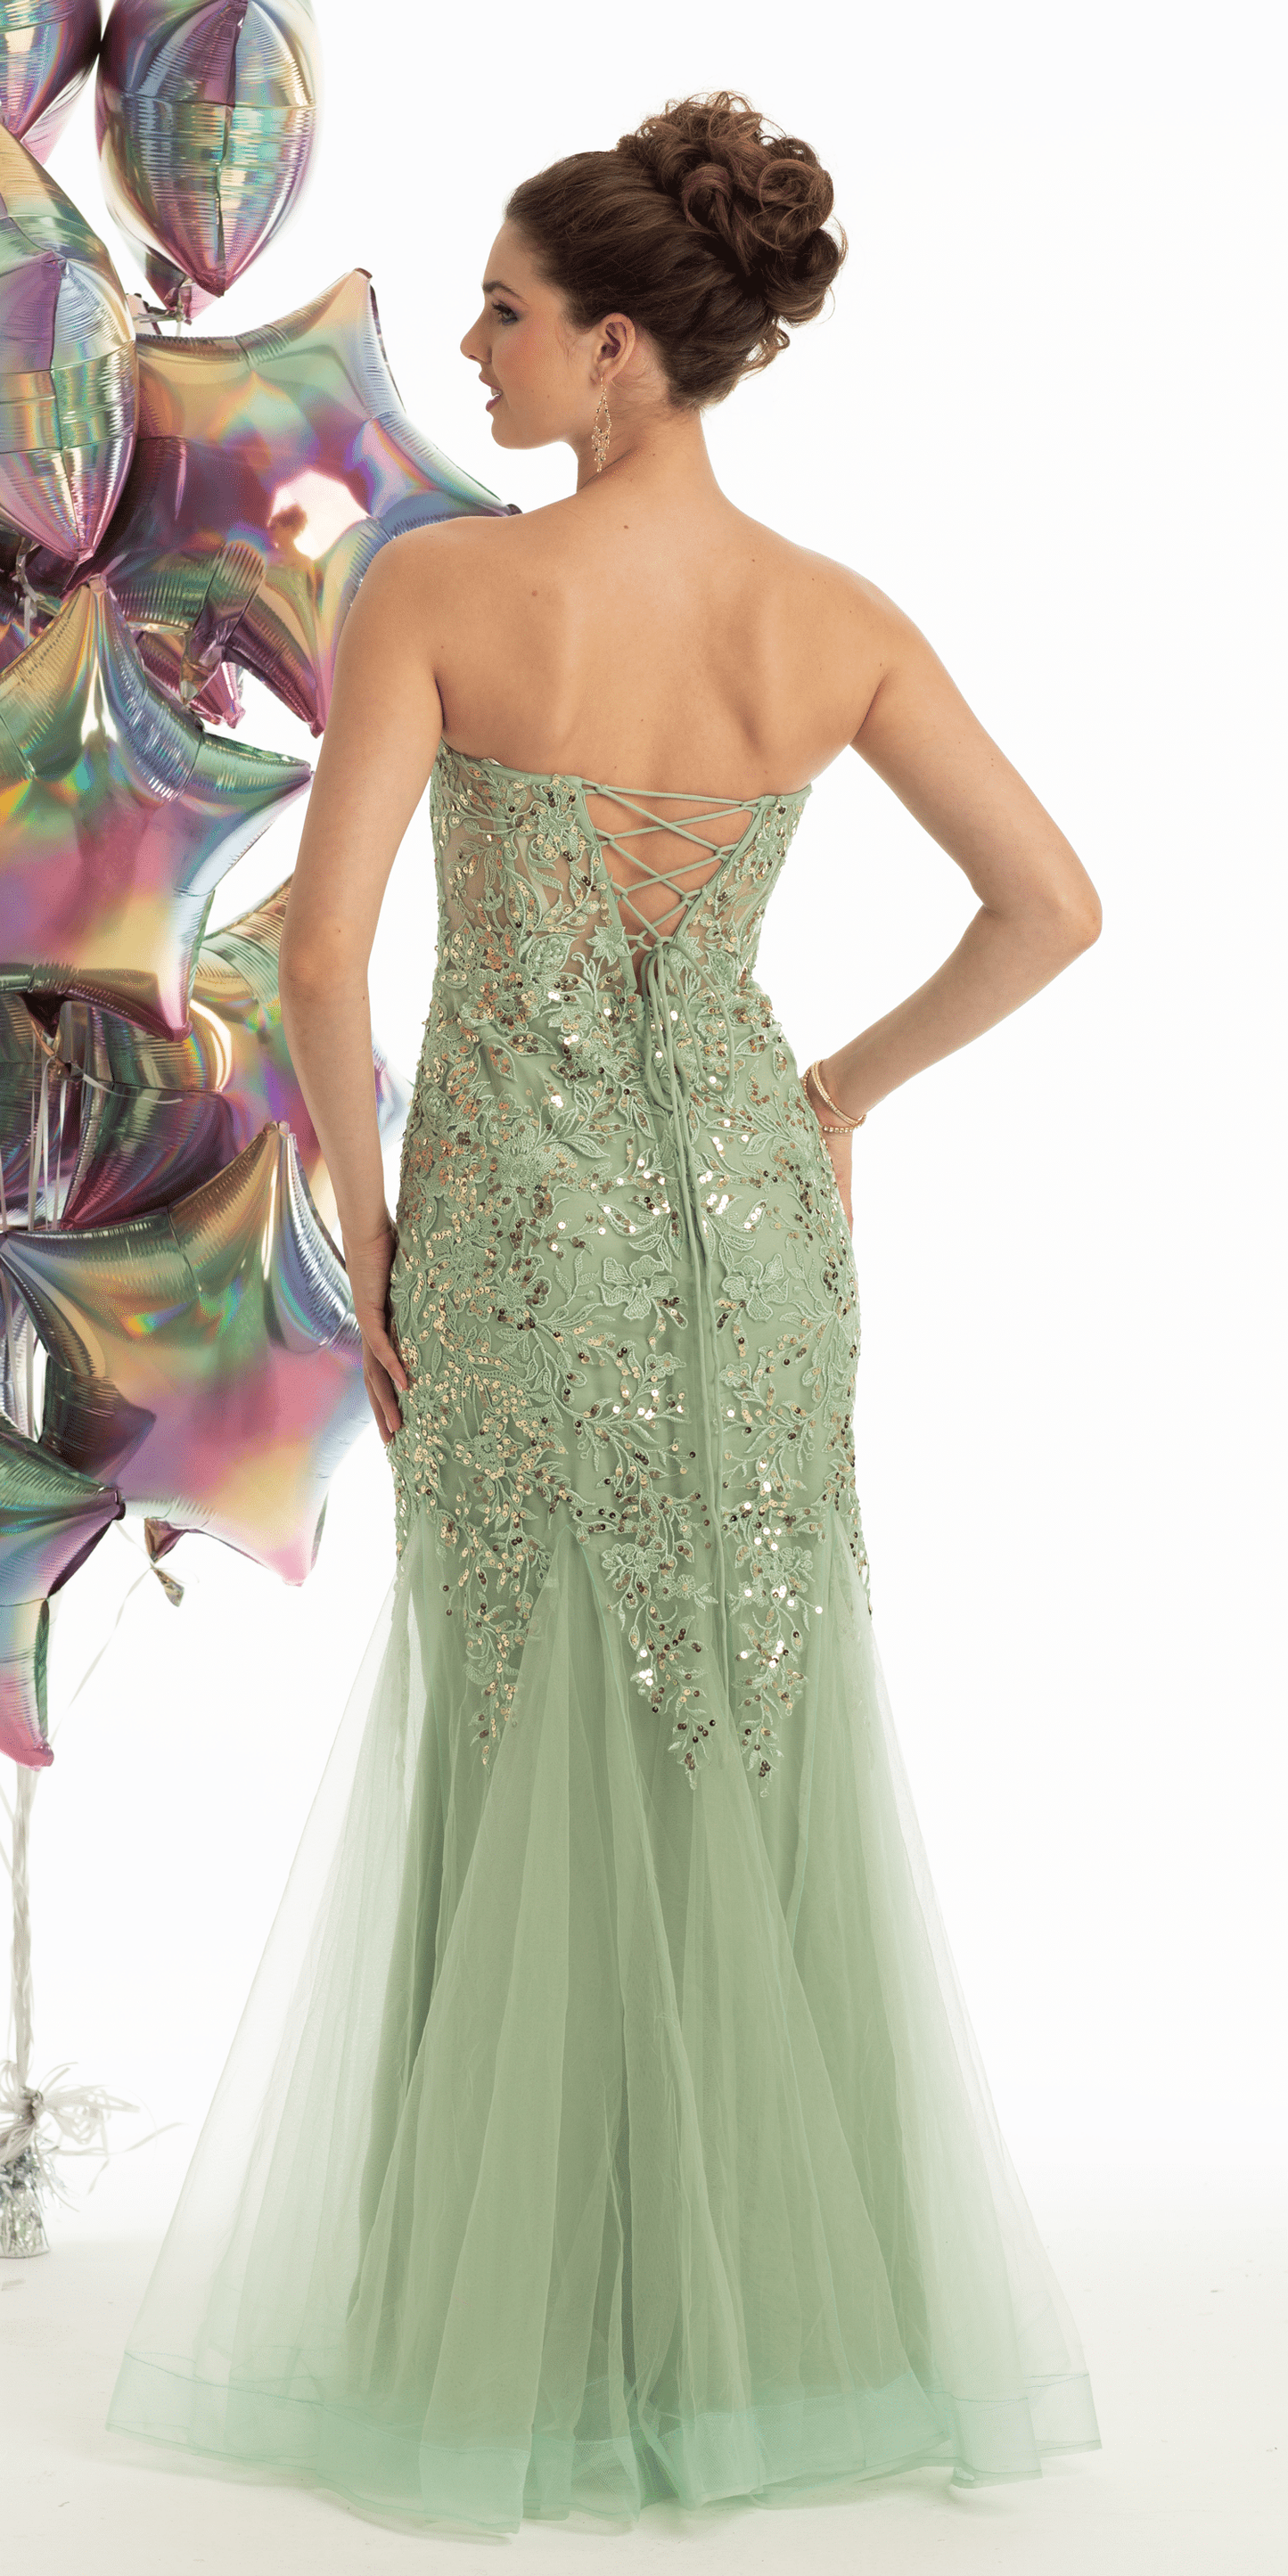 Camille La Vie Strapless Embroidered Mermaid Dress with Mesh Godets